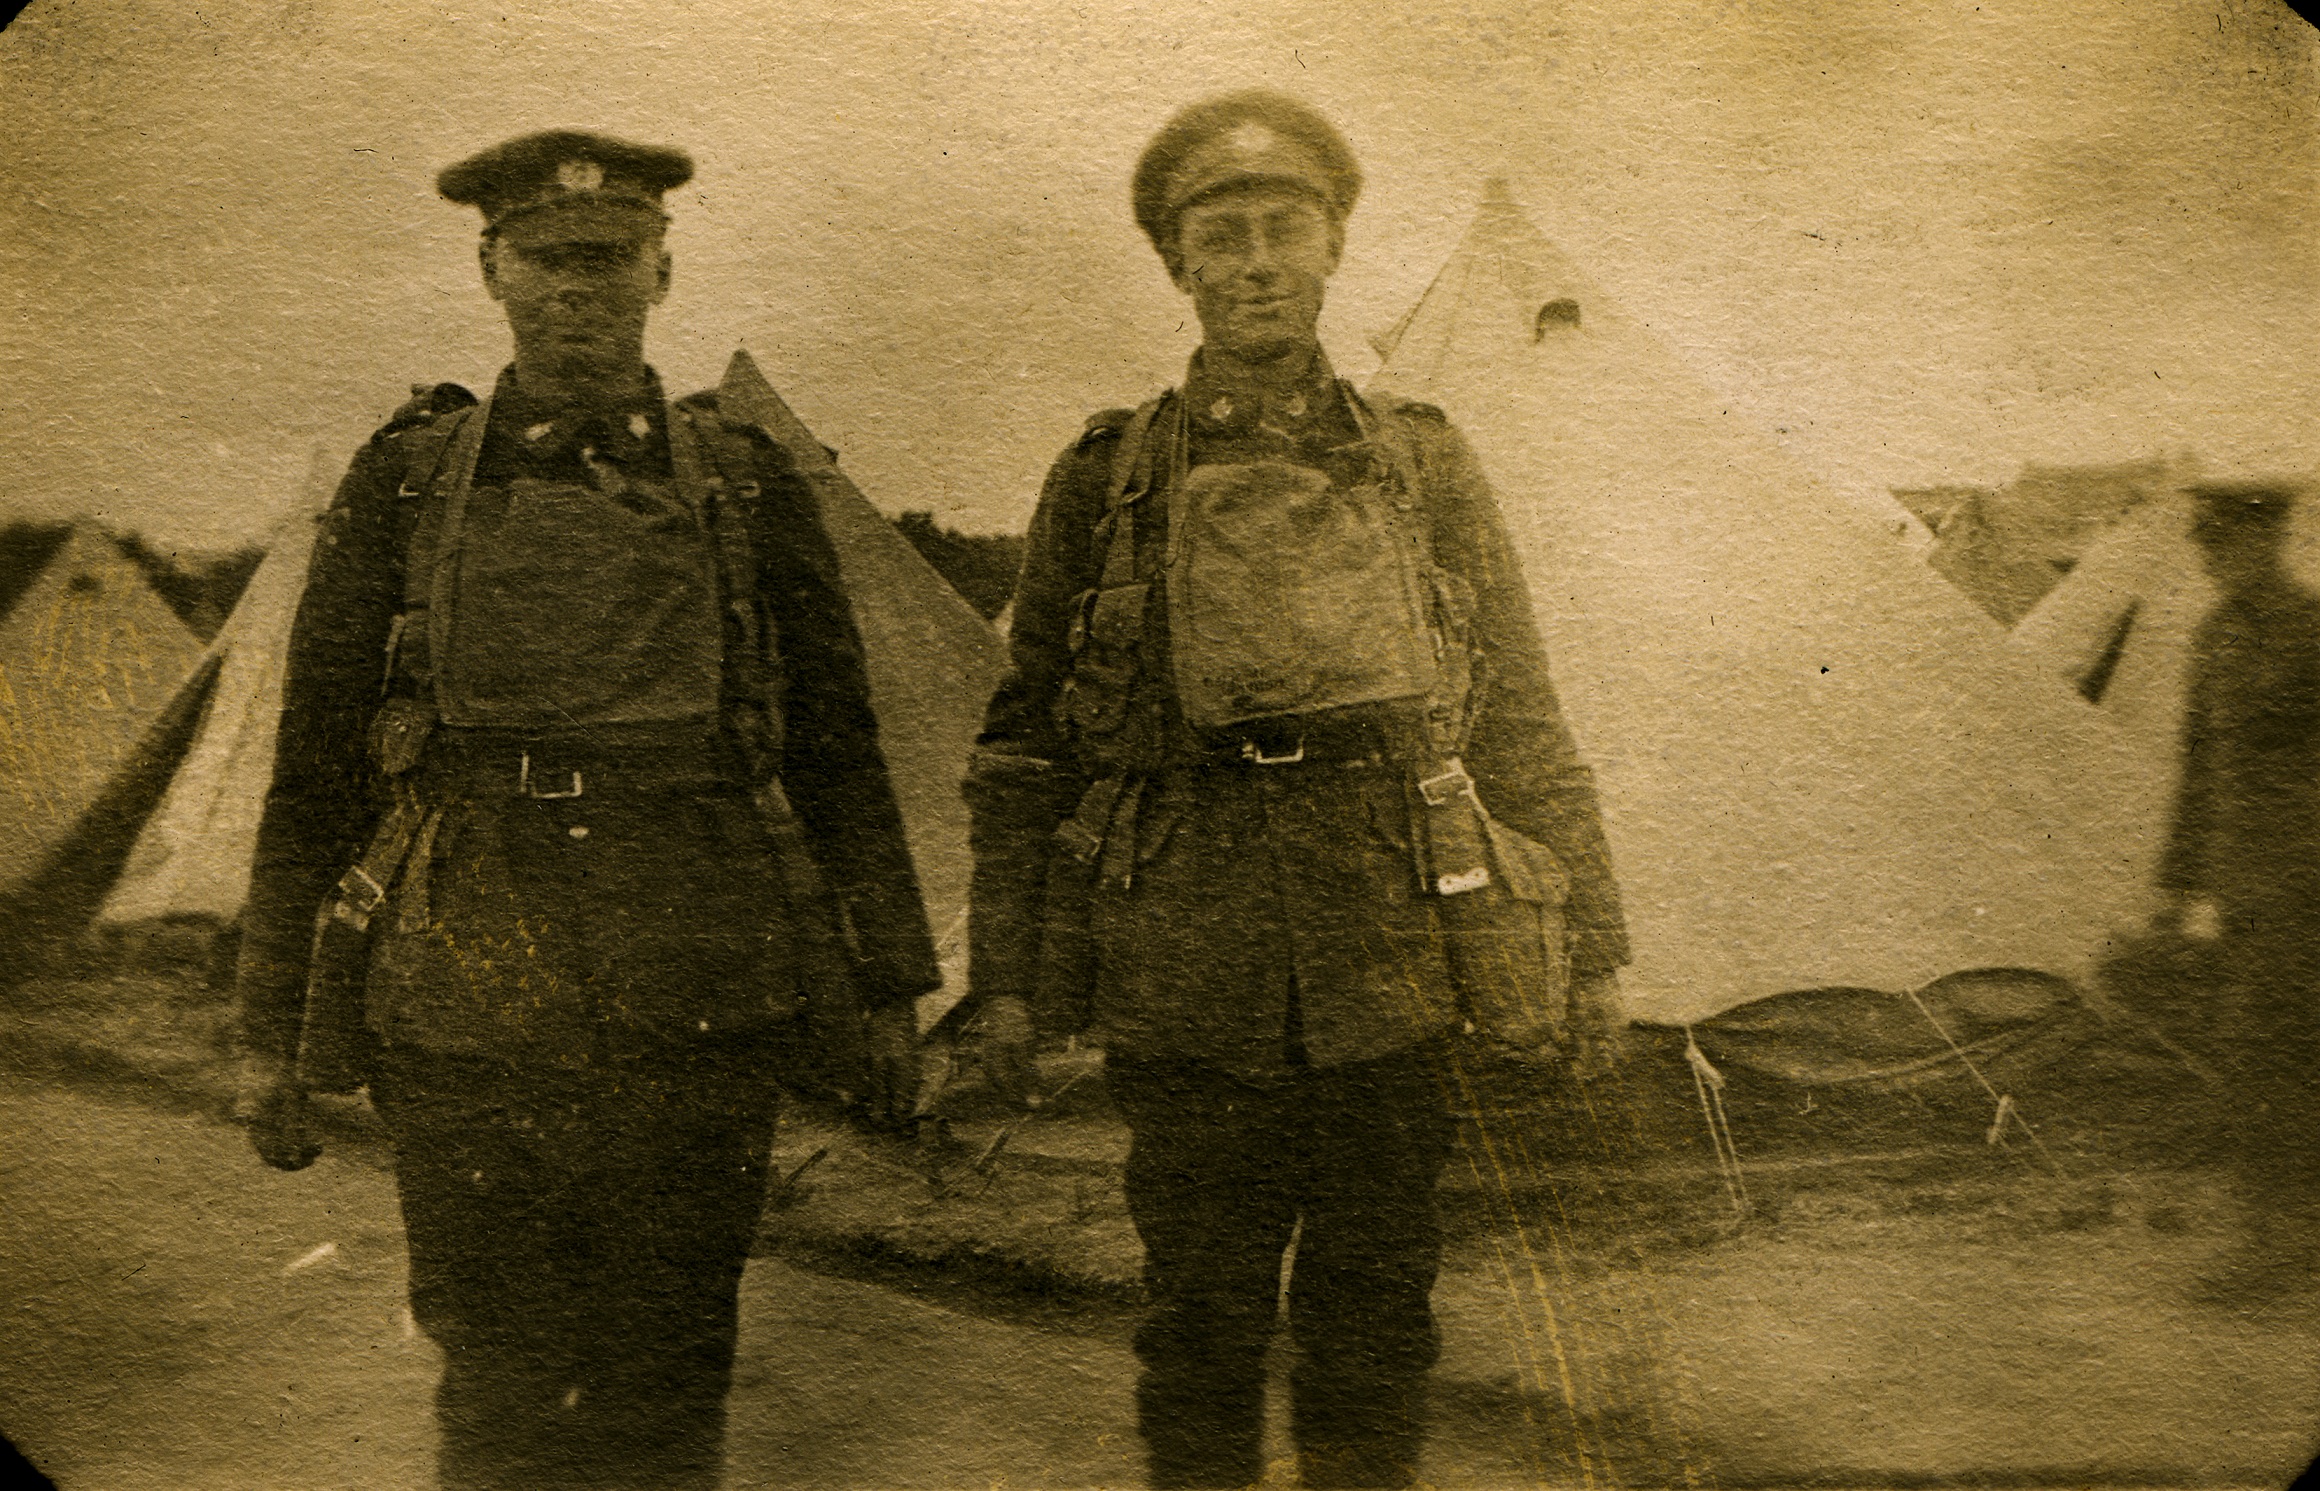 Cub and Len in Saint-Jean-sur-Richelieu, Quebec in full military kit in 1917.